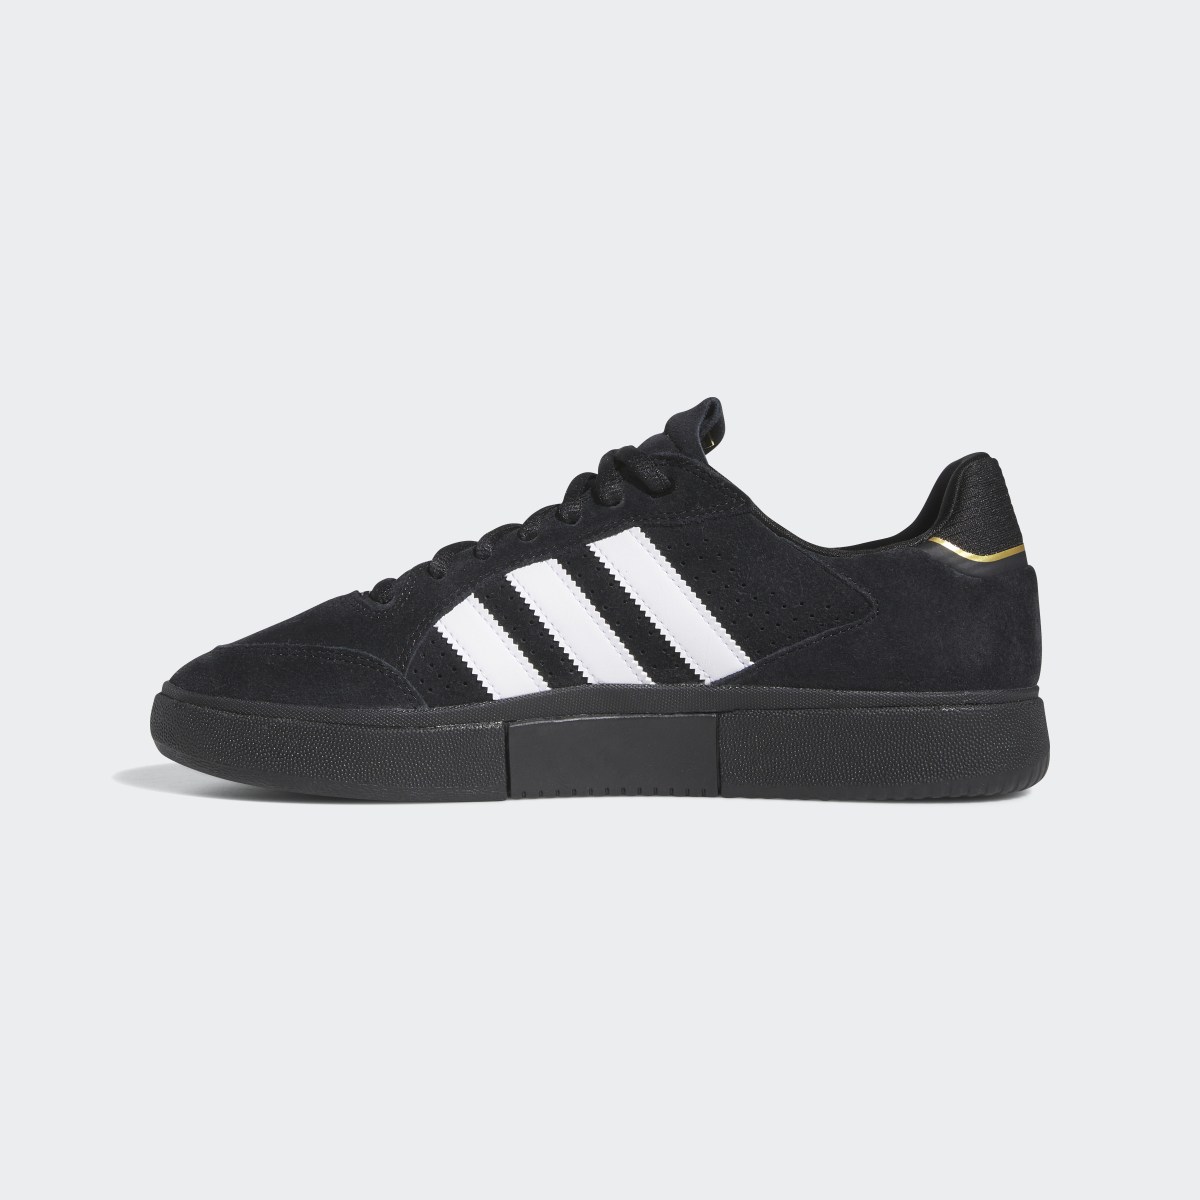 Adidas Tyshawn Low Shoes. 7